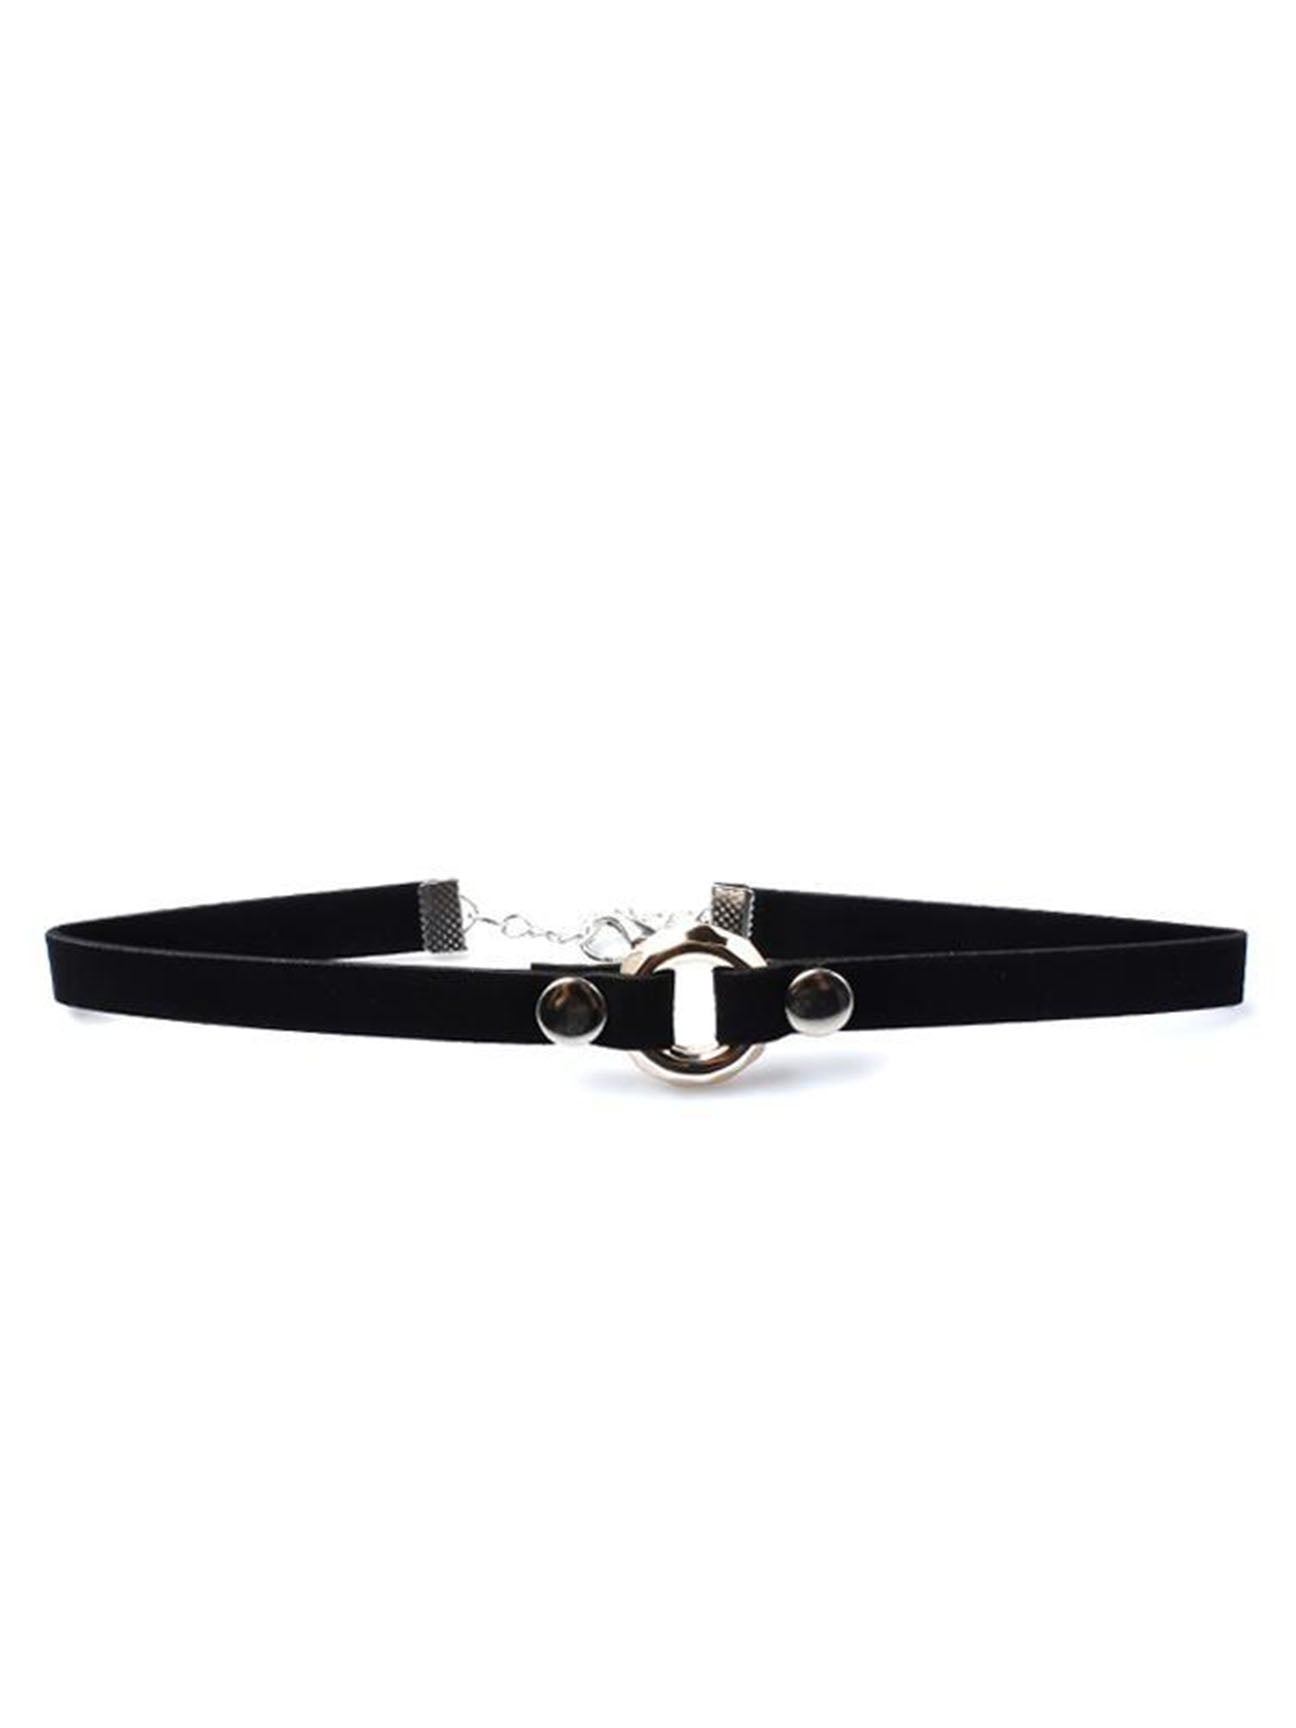 Faux Suede Choker Necklace With Ring Charm In Black